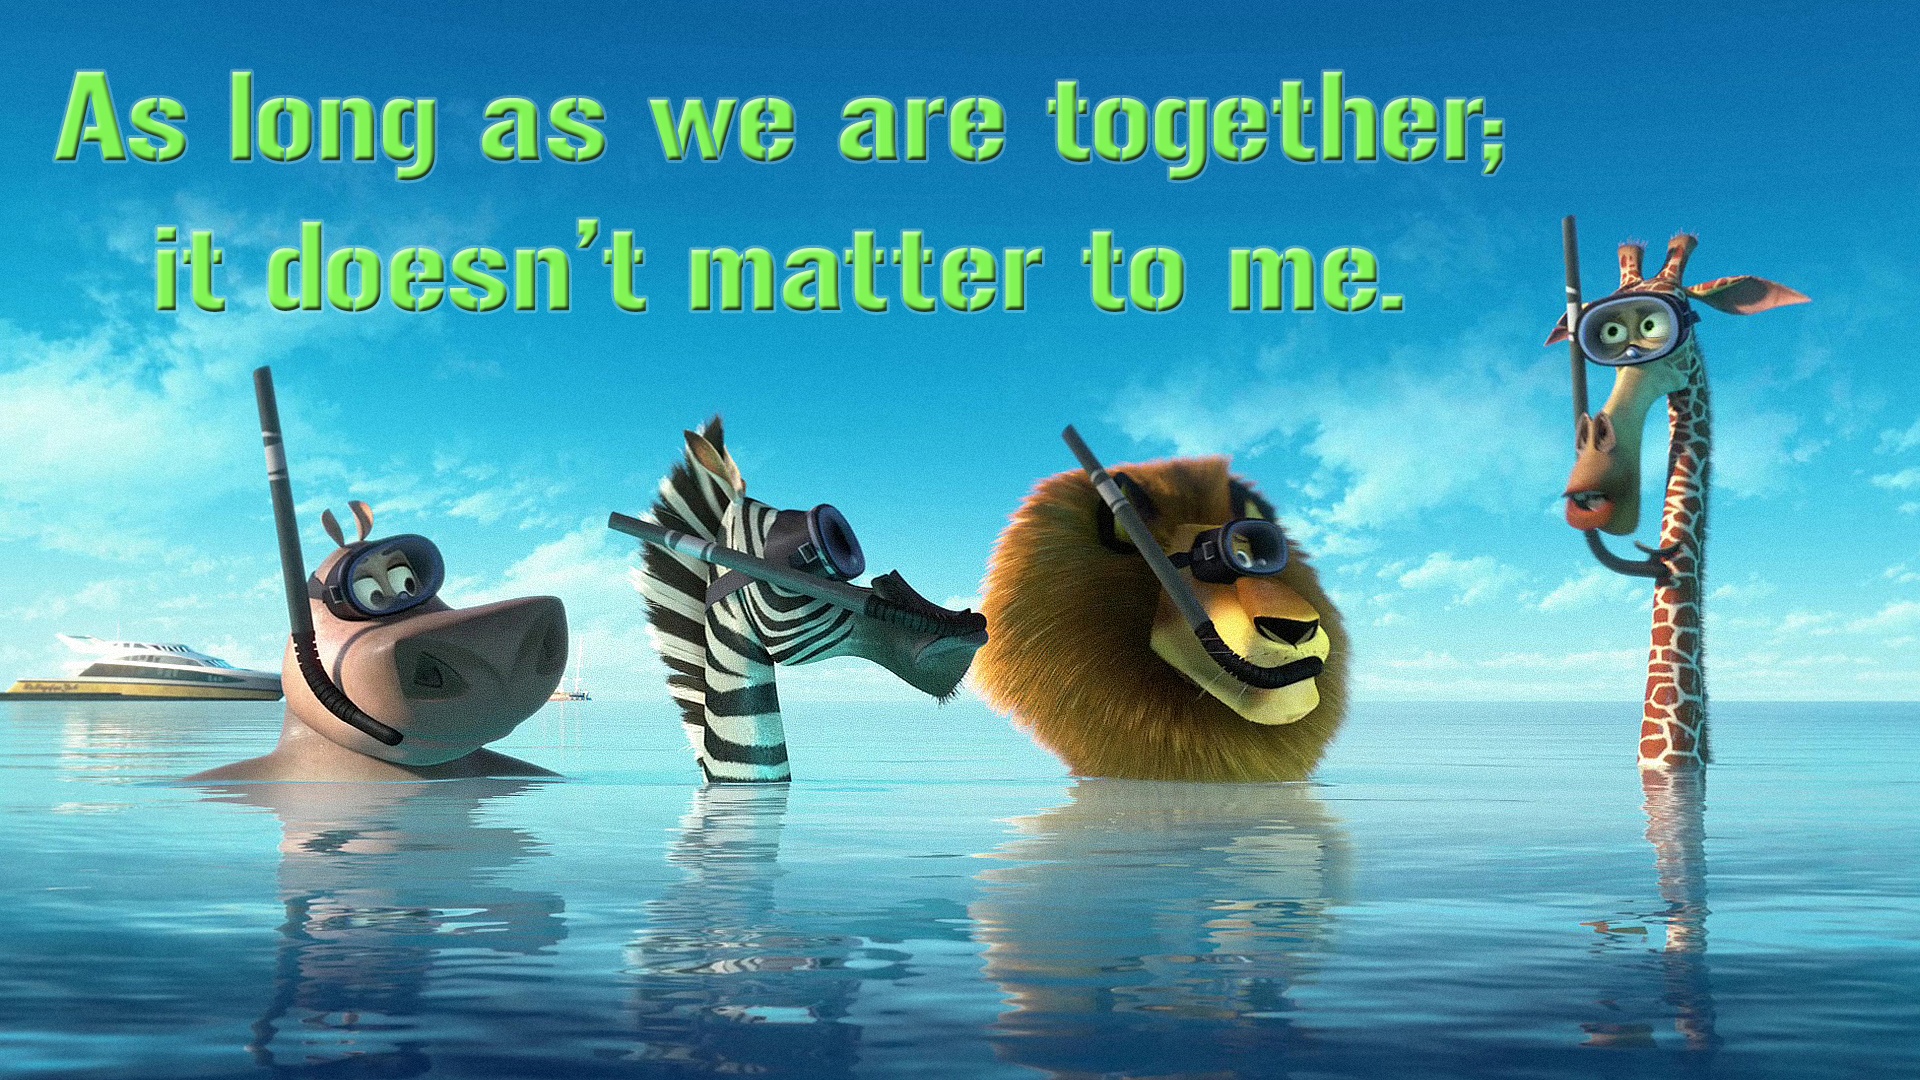 20 Inspiring Quotes From Animated Movies - LifeHack